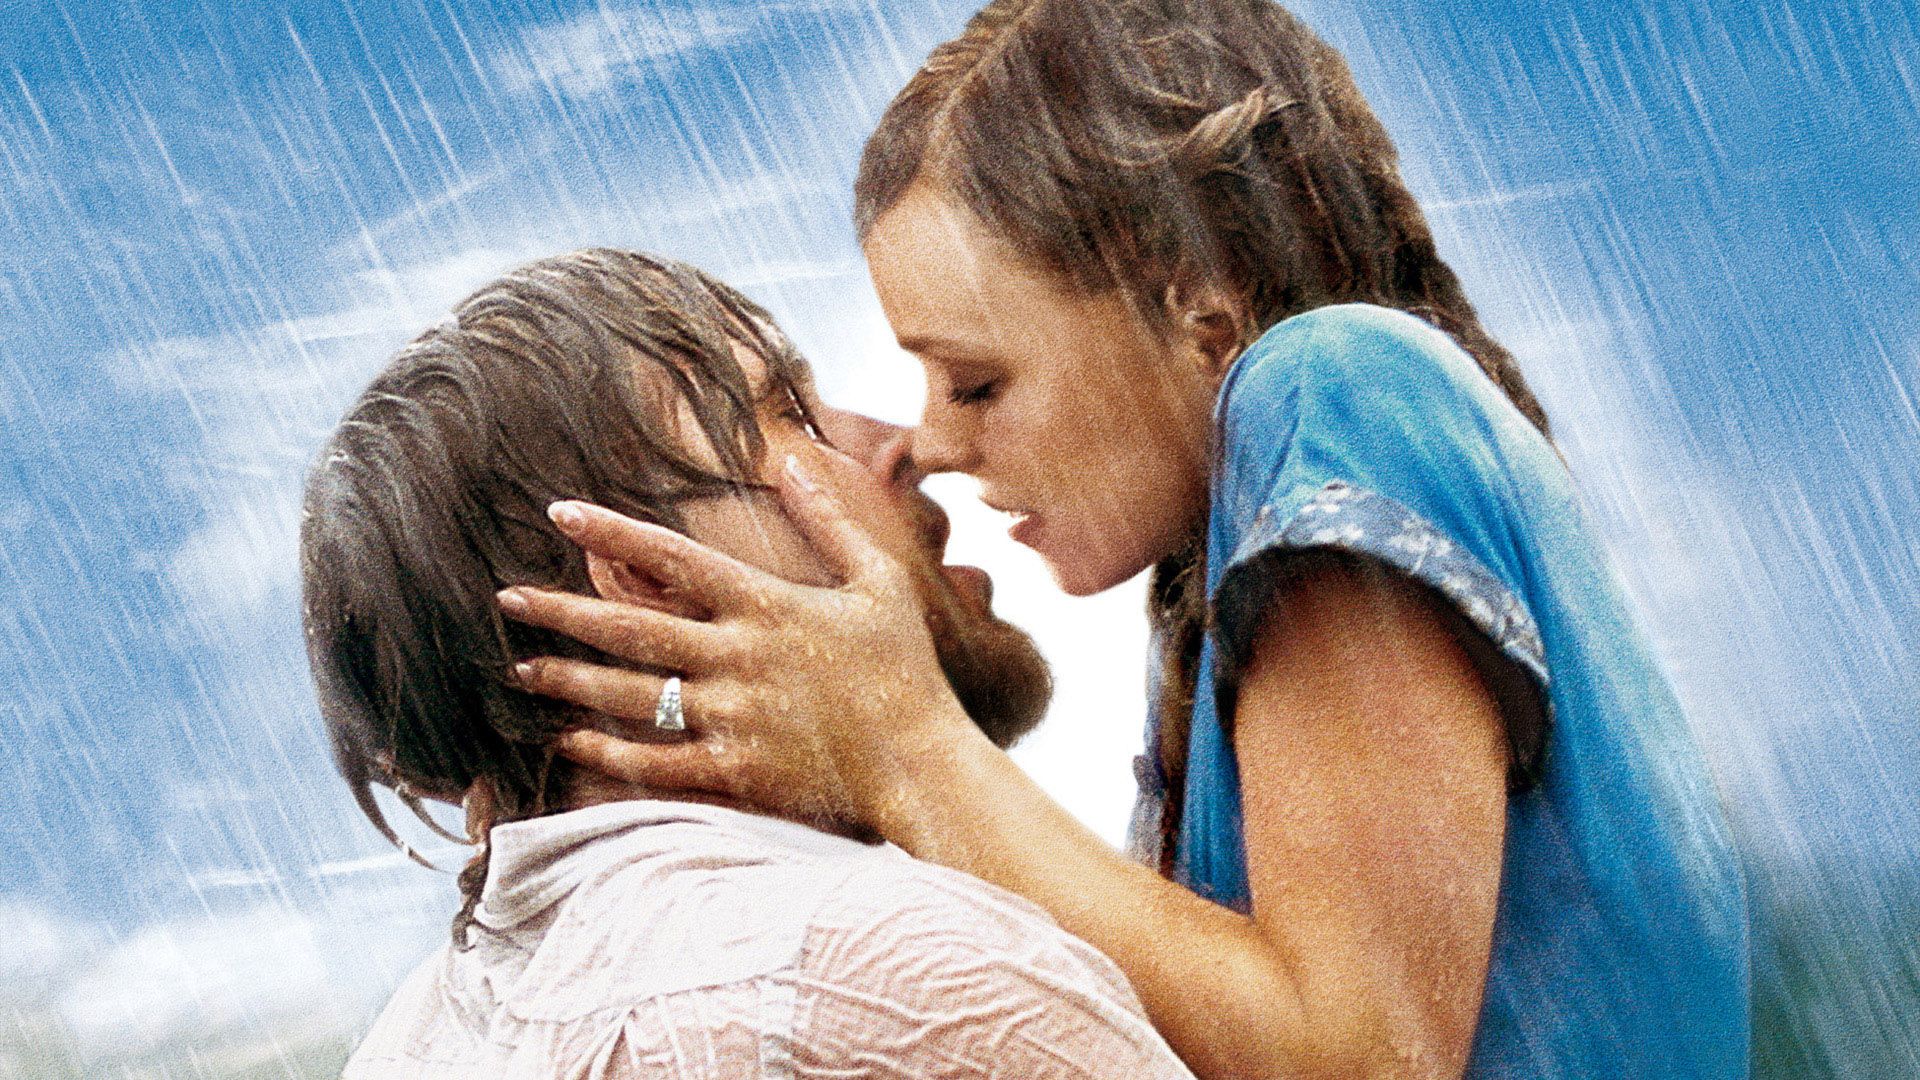 The Notebook background